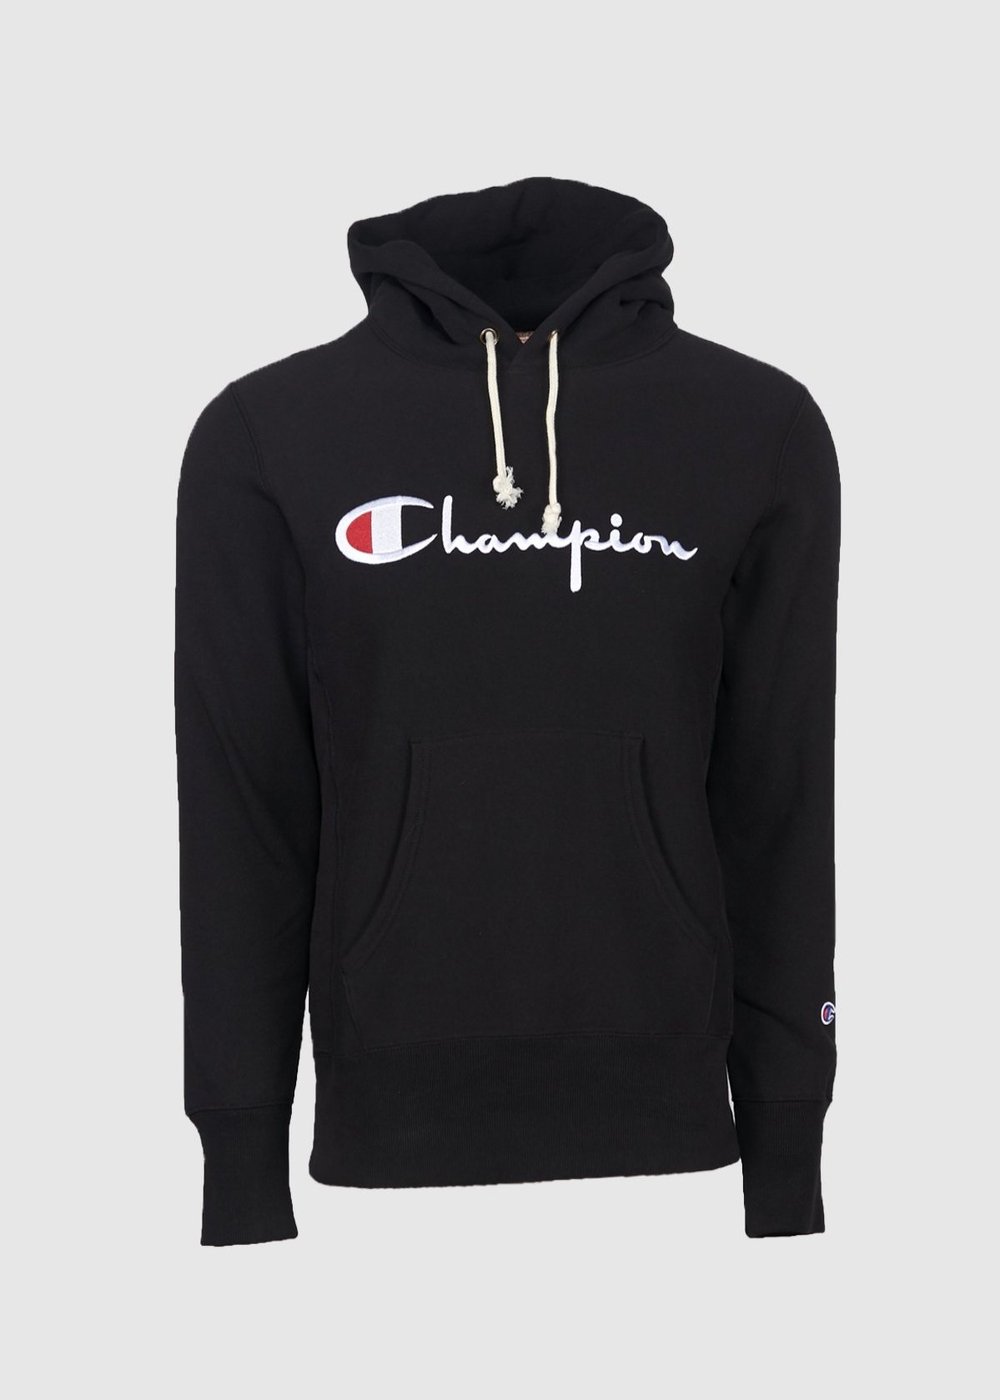 Download champion logo hoodie 10 free Cliparts | Download images on ...